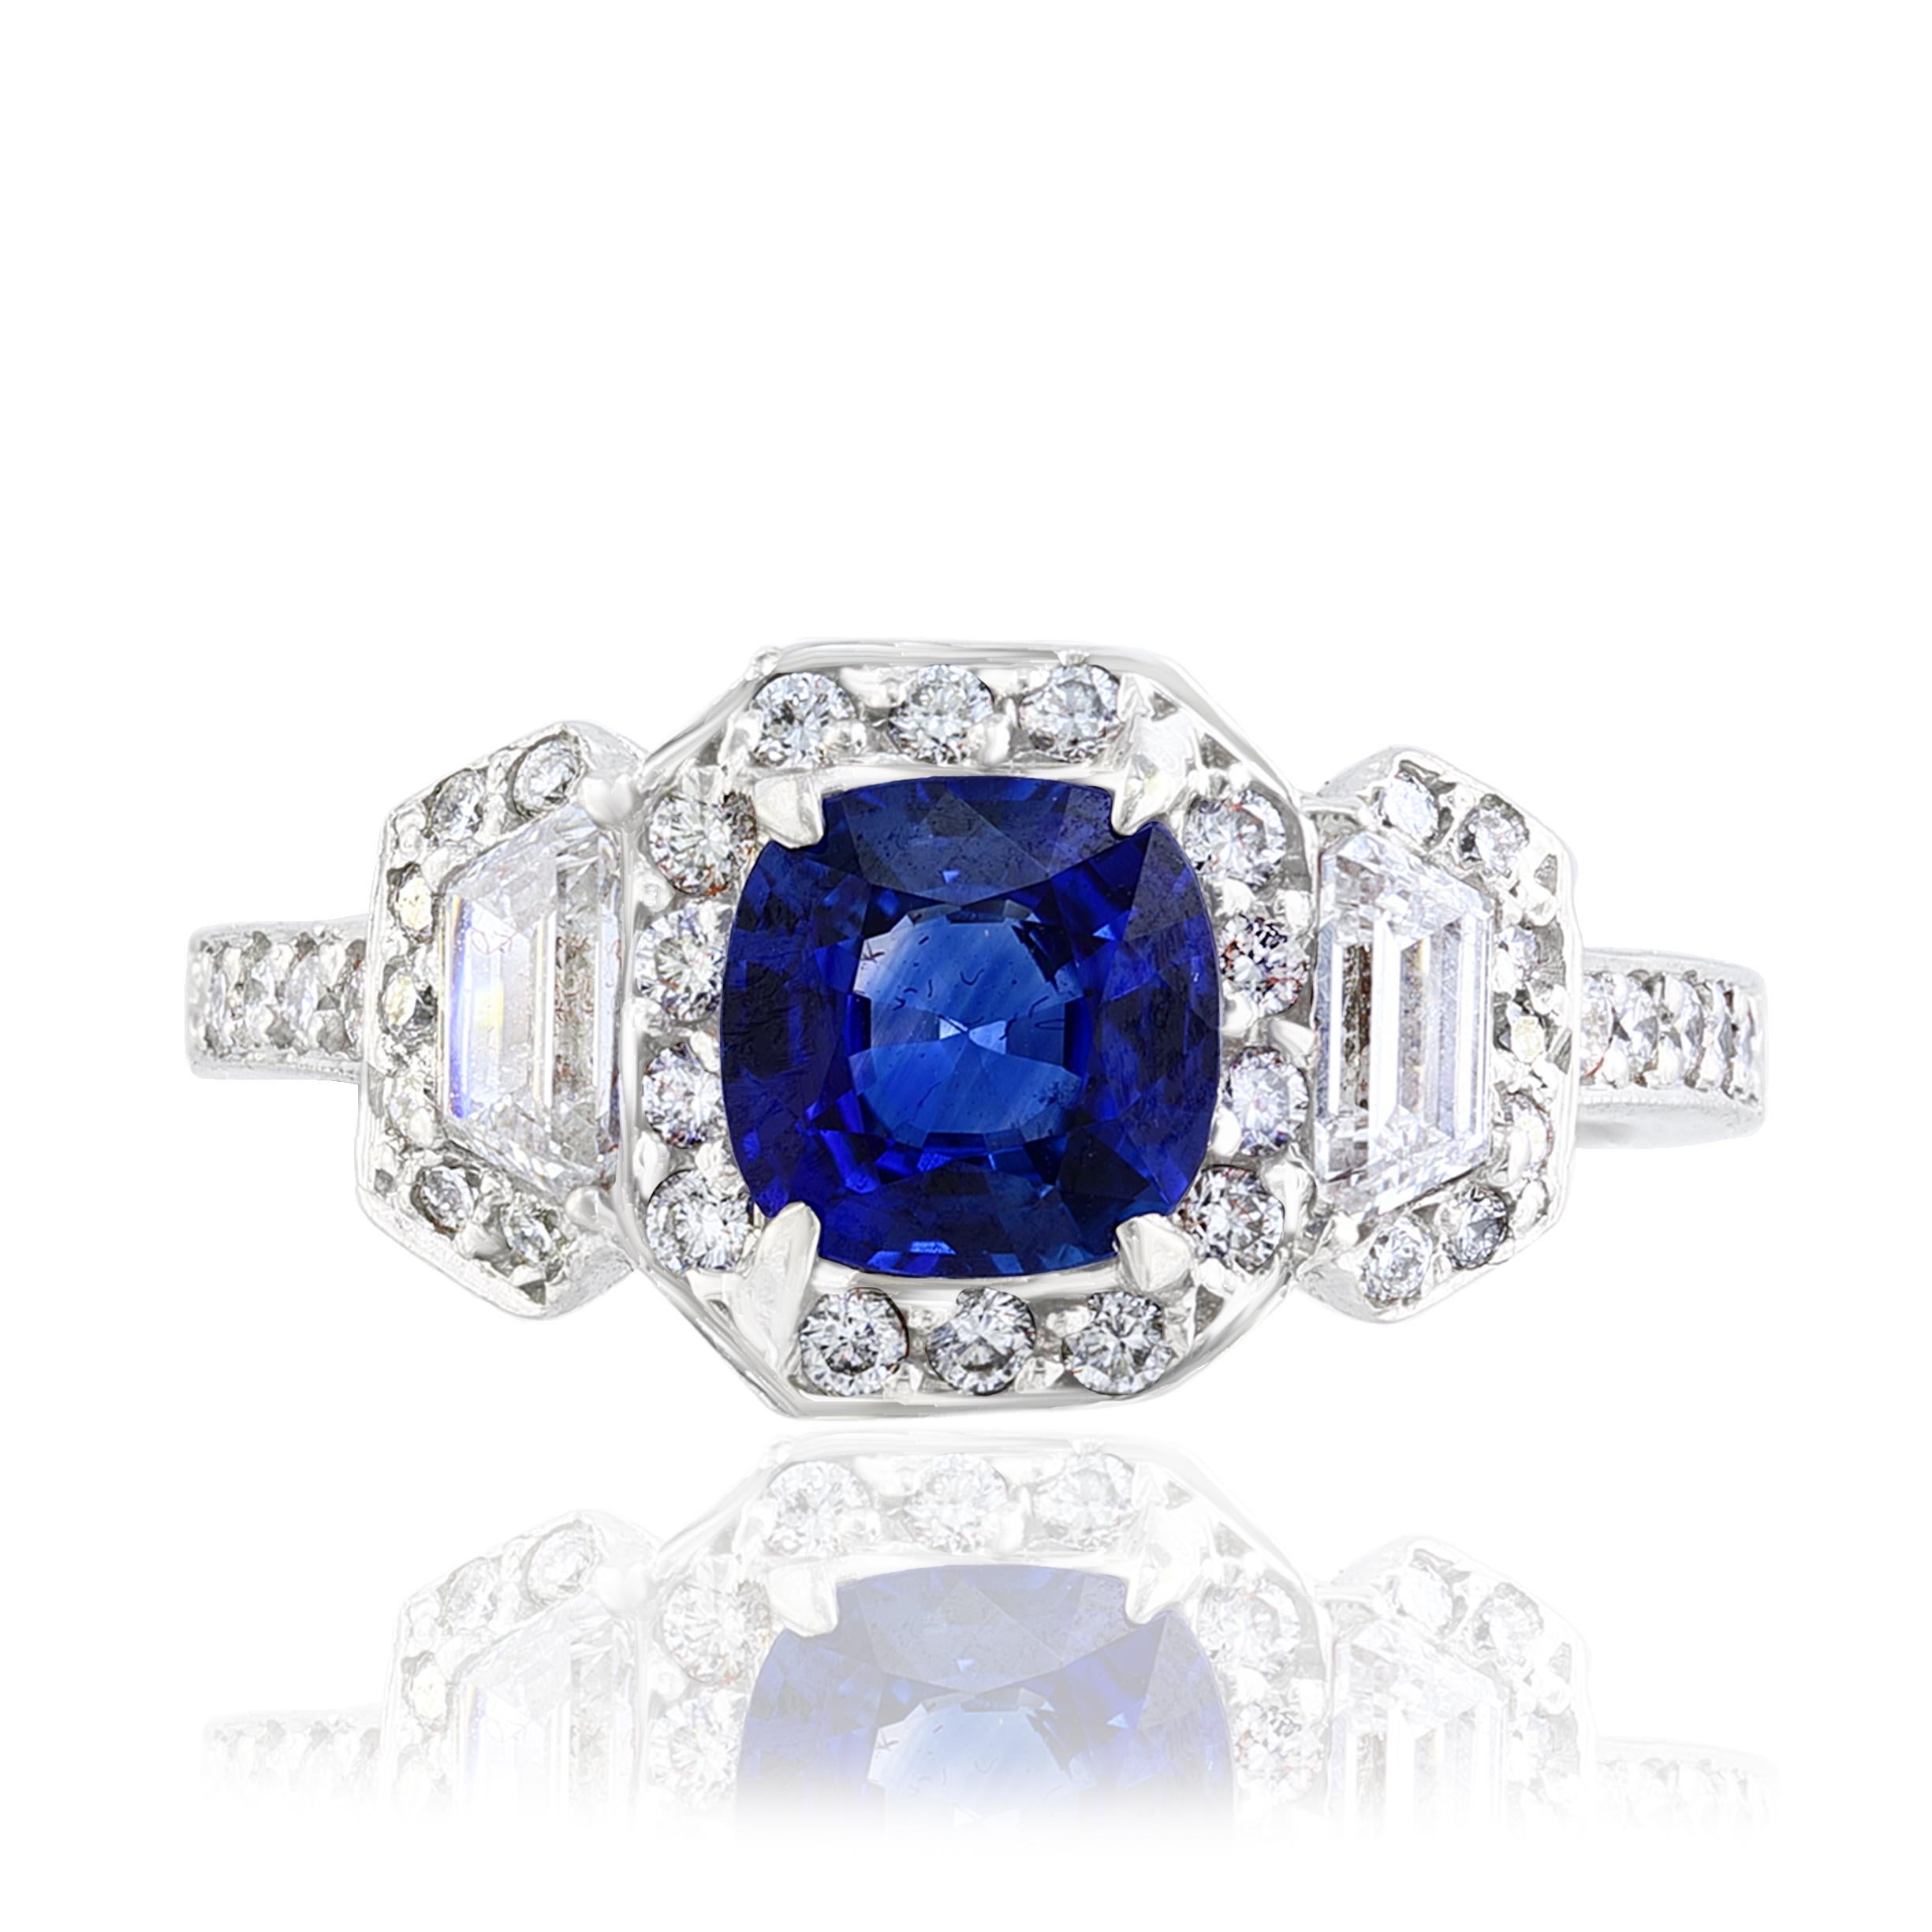 A stunning ring showcasing a rich blue cushion cut sapphire weighing 1.02 carats surrounded by a row of diamonds. Flanking the center stone are two brilliant cut straight baguette diamonds, weighing 0.28 carats total, framed in a brilliant diamond